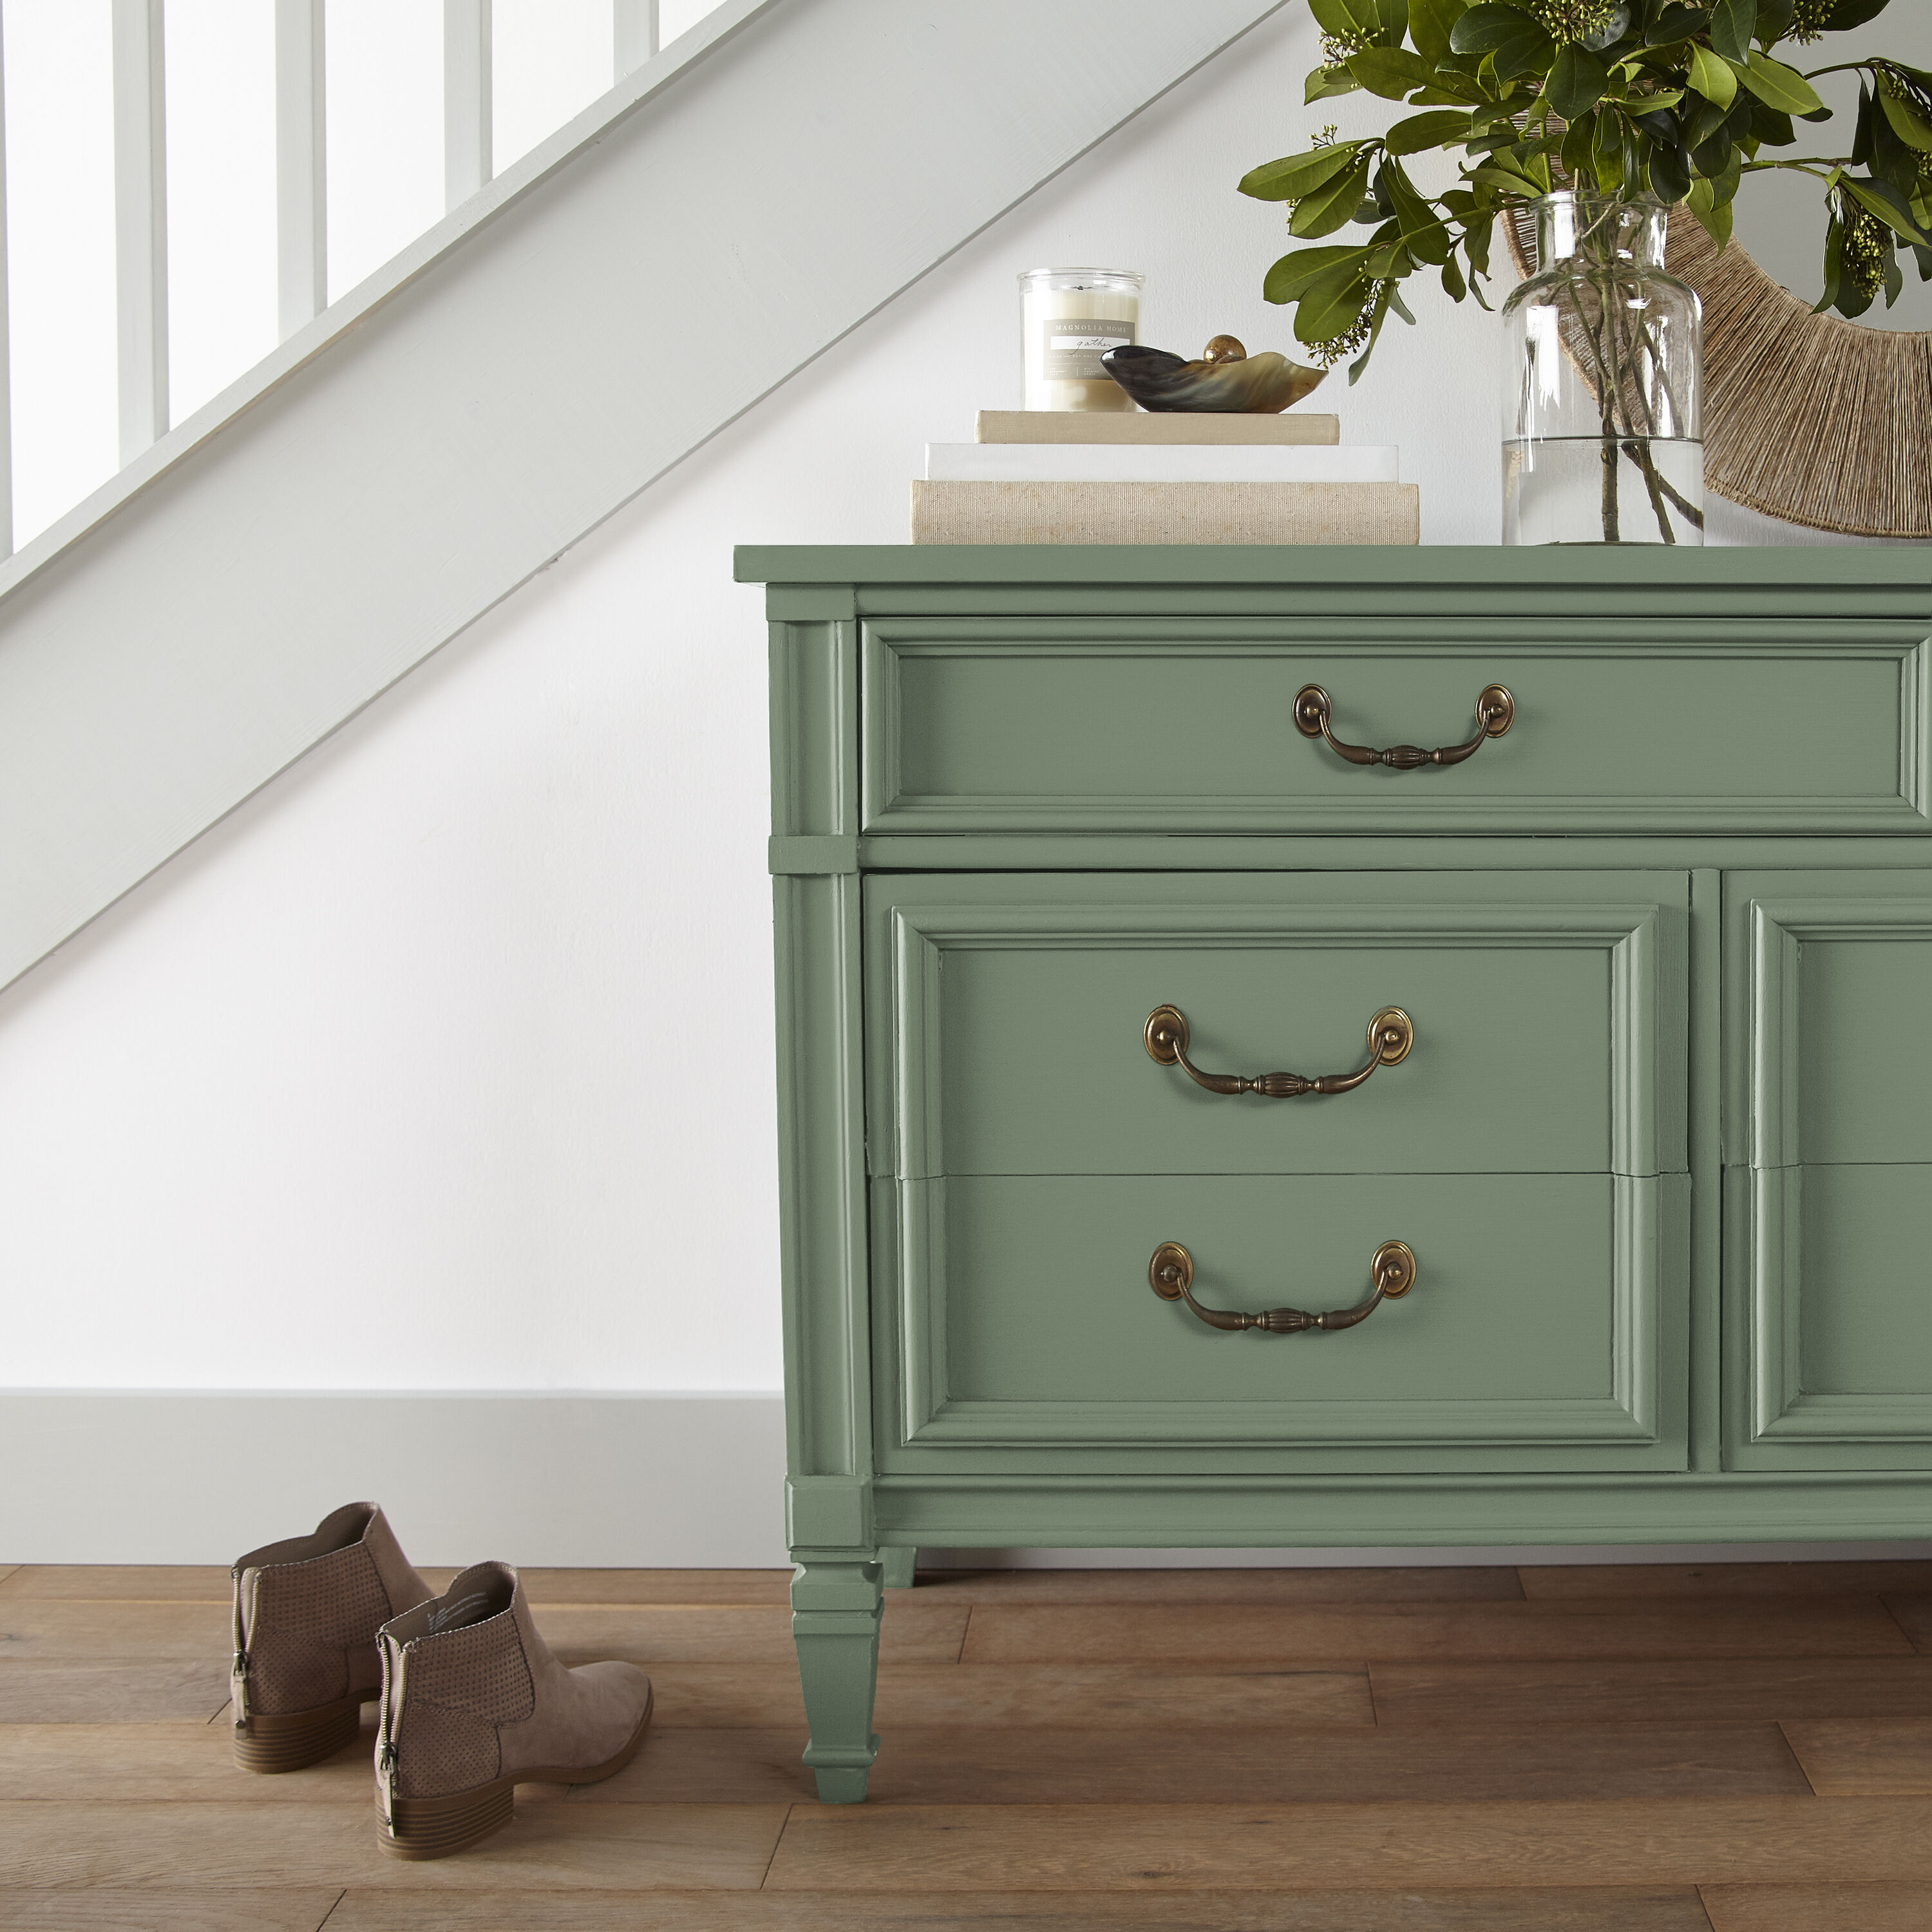 14 Amazing Green Paint Colors for the Home - West Magnolia Charm